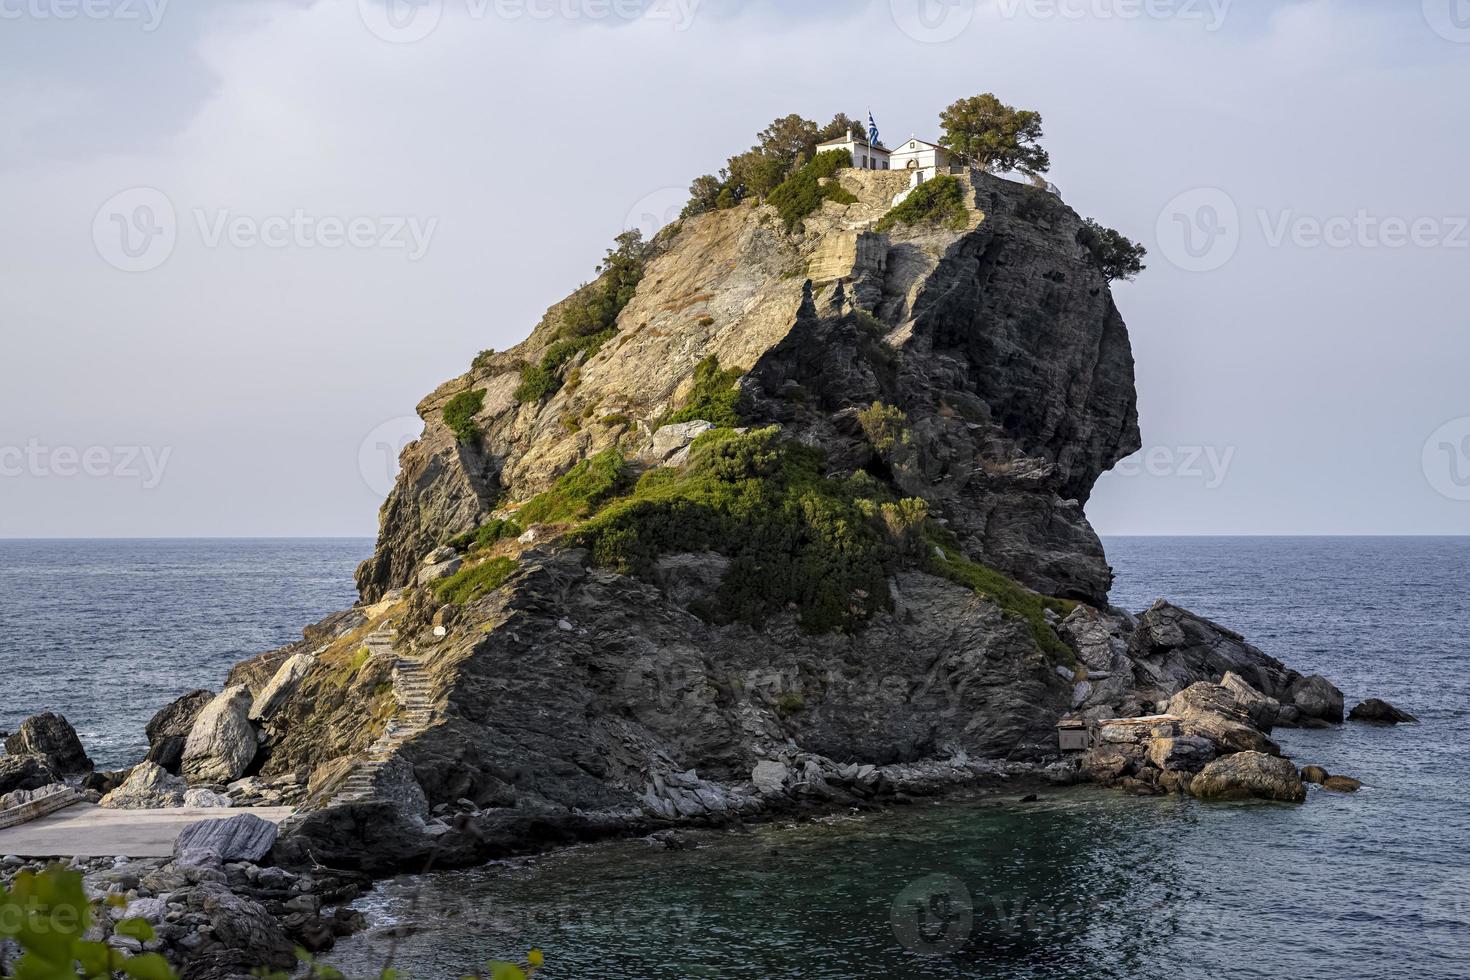 Featured in the hit film musical 'Mama Mia', the chapel of St John the Baptist sits dramatically on the top of a finger of rock off the island of Skopelos in the Aegean sea in Greece. photo